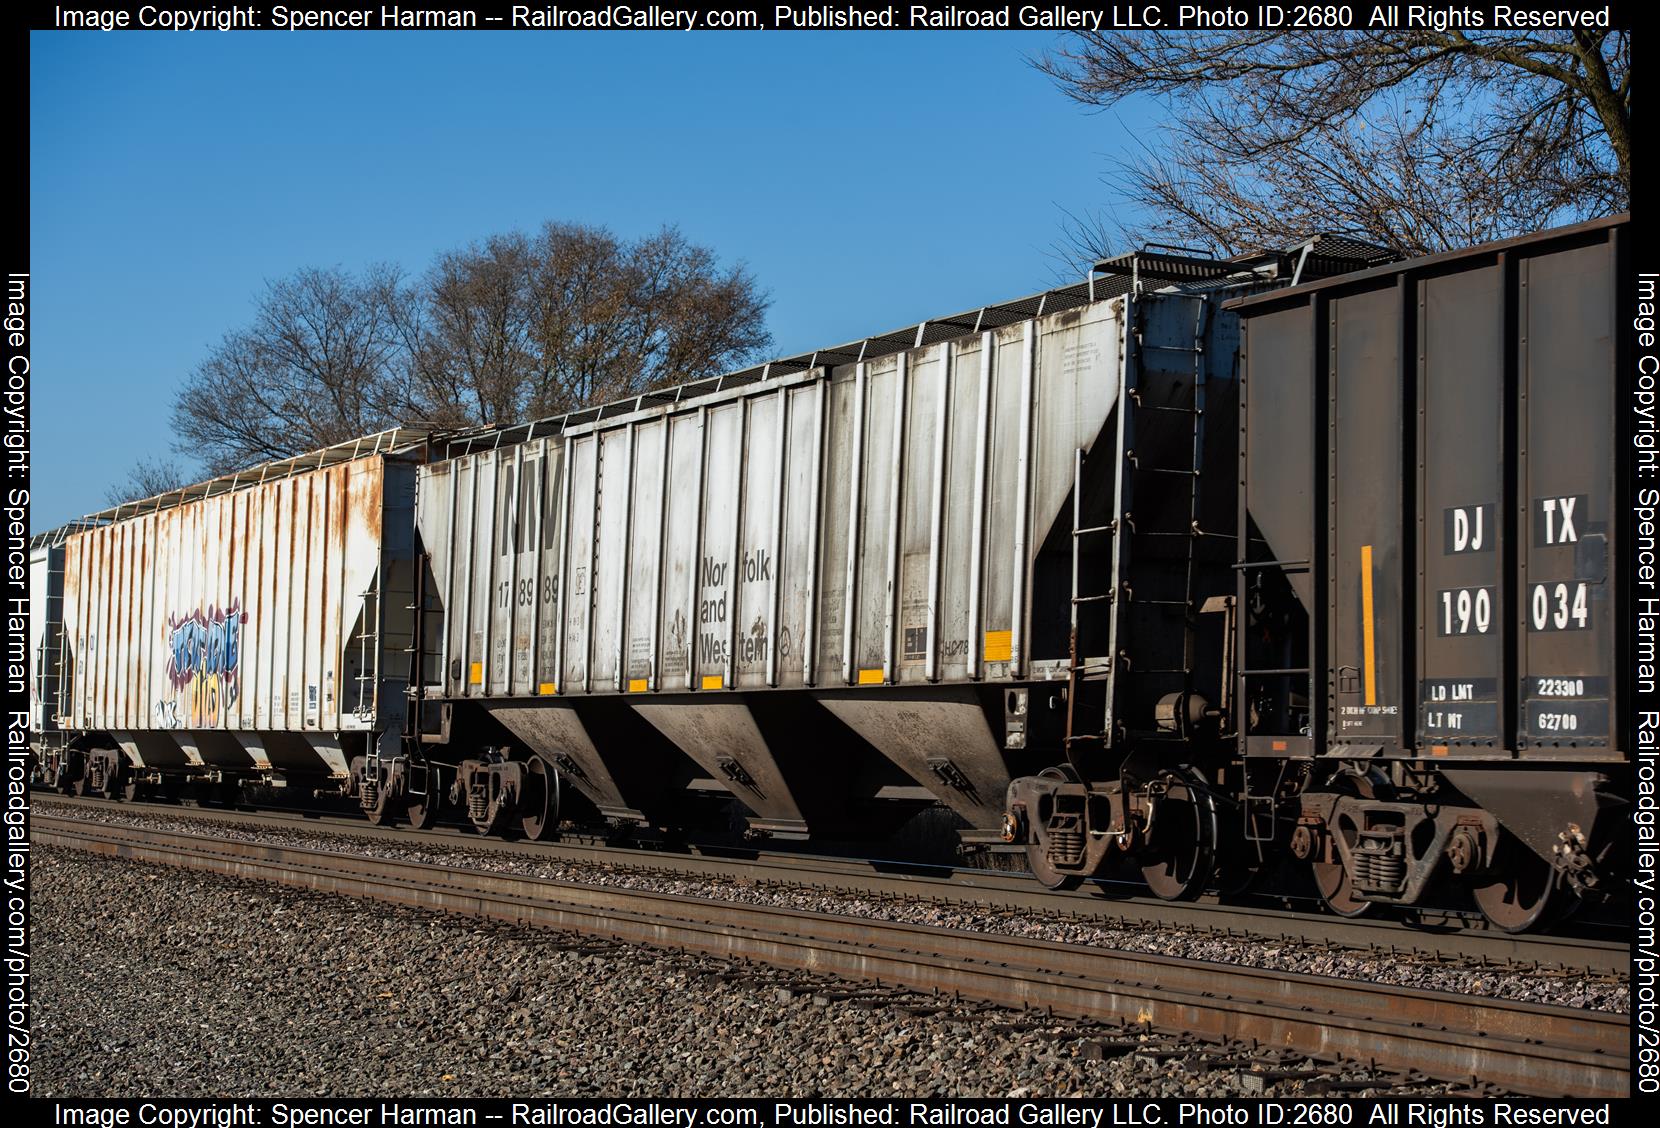 NW 178989 is a class Covered Hopper and  is pictured in Osceola, Indiana, USA.  This was taken along the Chicago Line on the Norfolk Southern. Photo Copyright: Spencer Harman uploaded to Railroad Gallery on 12/15/2023. This photograph of NW 178989 was taken on Sunday, November 19, 2023. All Rights Reserved. 